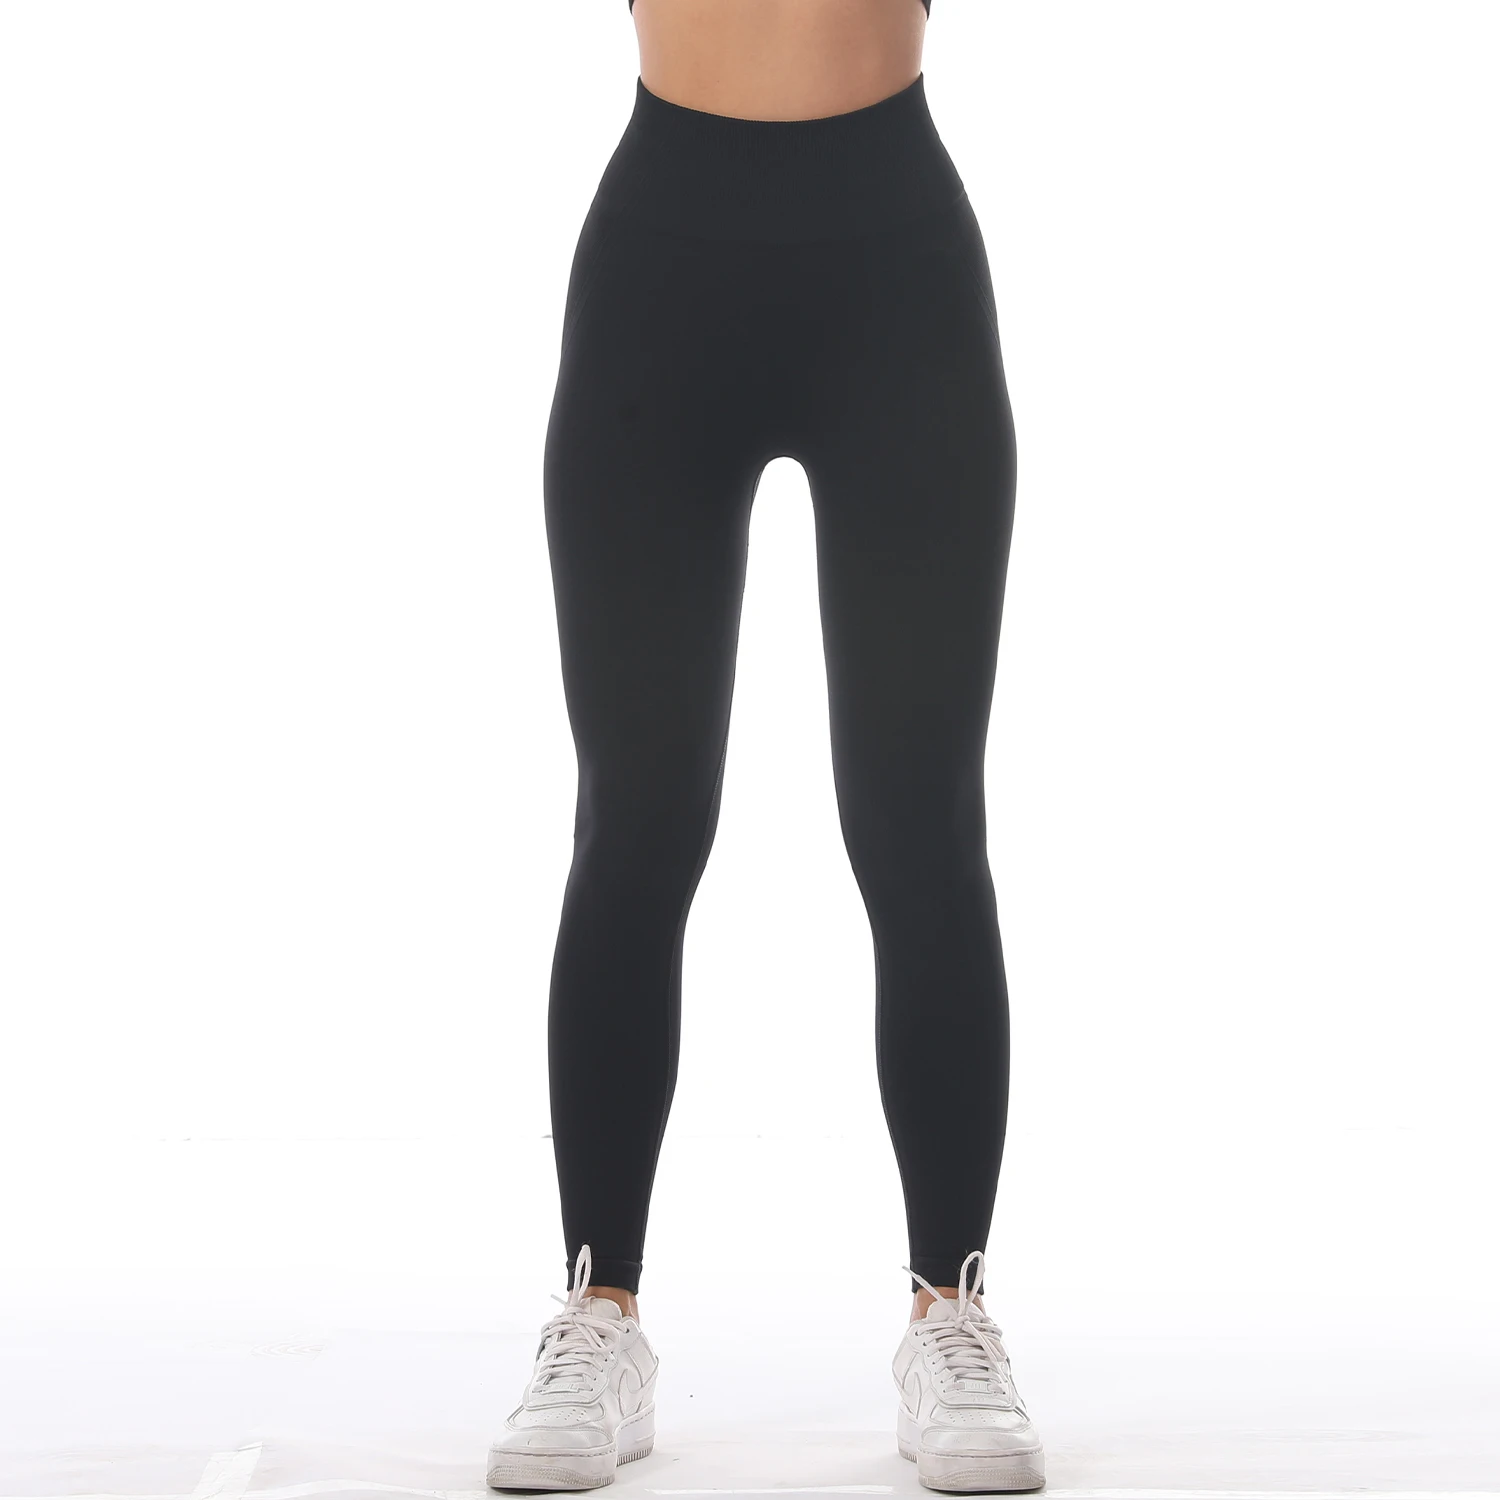 New tight high waist sweatpants women's buttock lifting fitness pants sports peach buttock nude feeling yoga pants